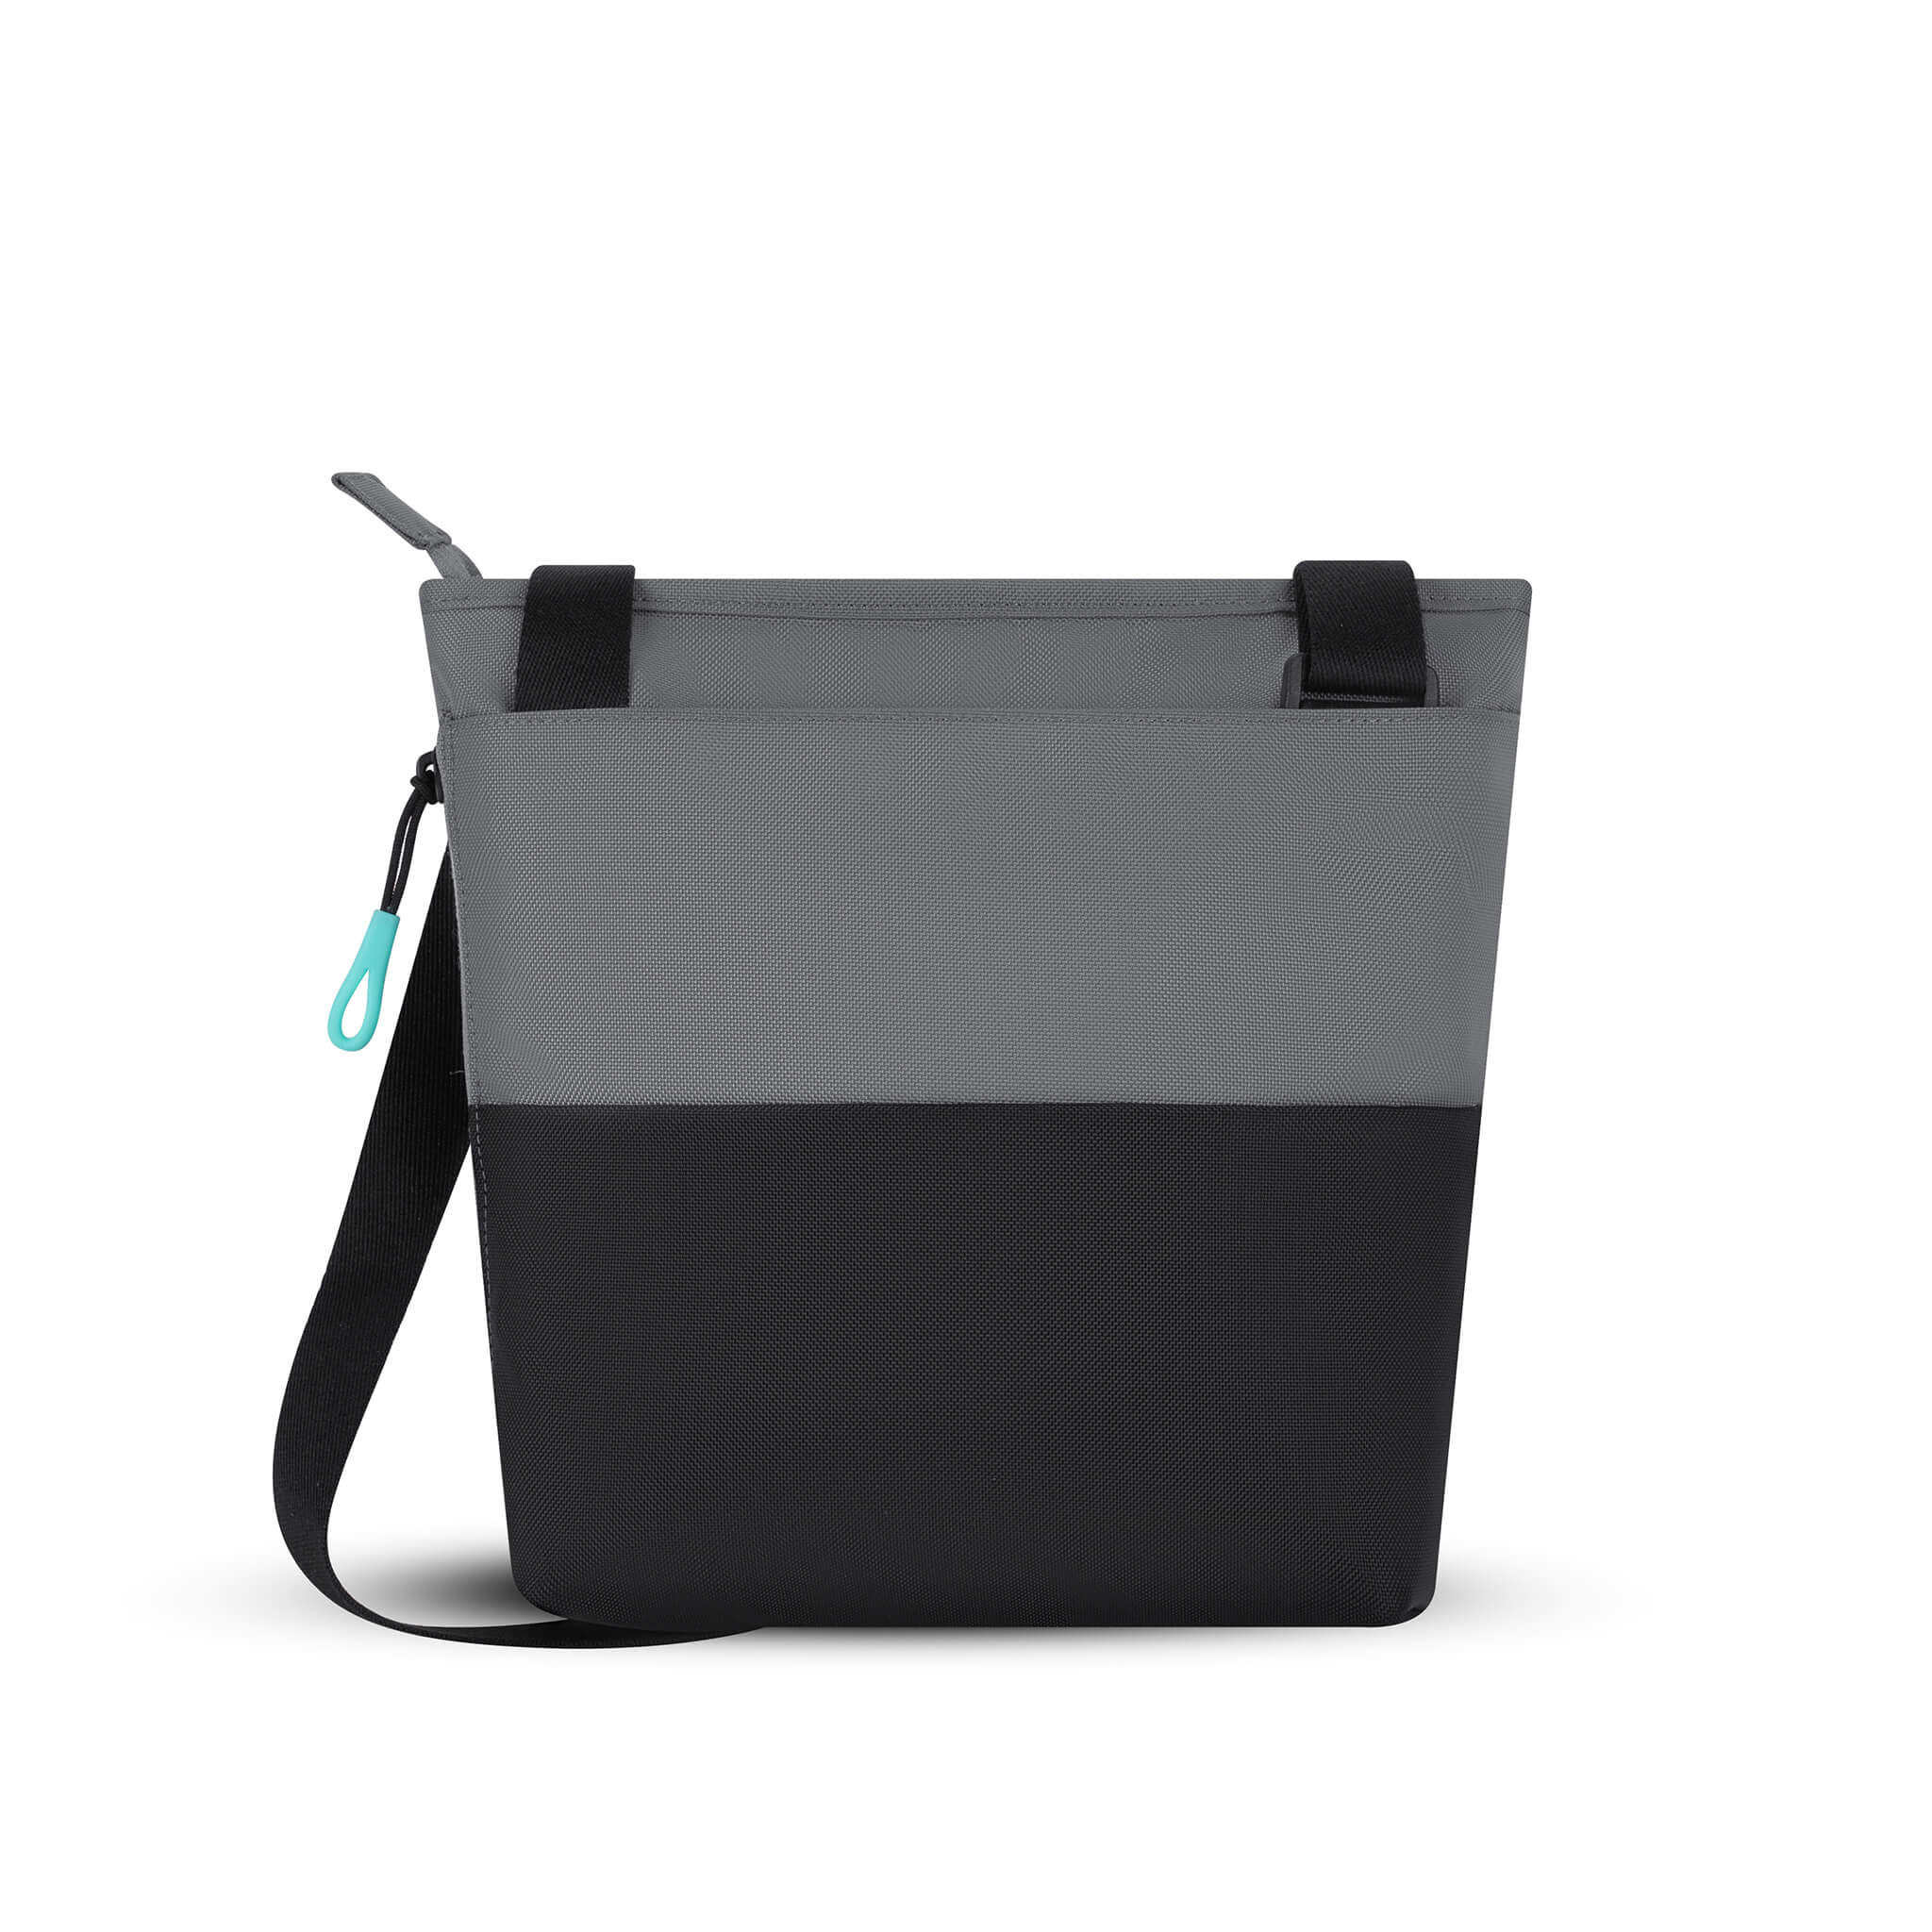 Back view of Sherpani crossbody travel bag, the Sadie in Moonstone. Sadie features include two front zipper pockets, a discrete side pocket, detachable keychain, adjustable crossbody strap, back slip pocket and RFID blocking technology. The Moonstone color is two-toned in gray and black with turquoise accents.